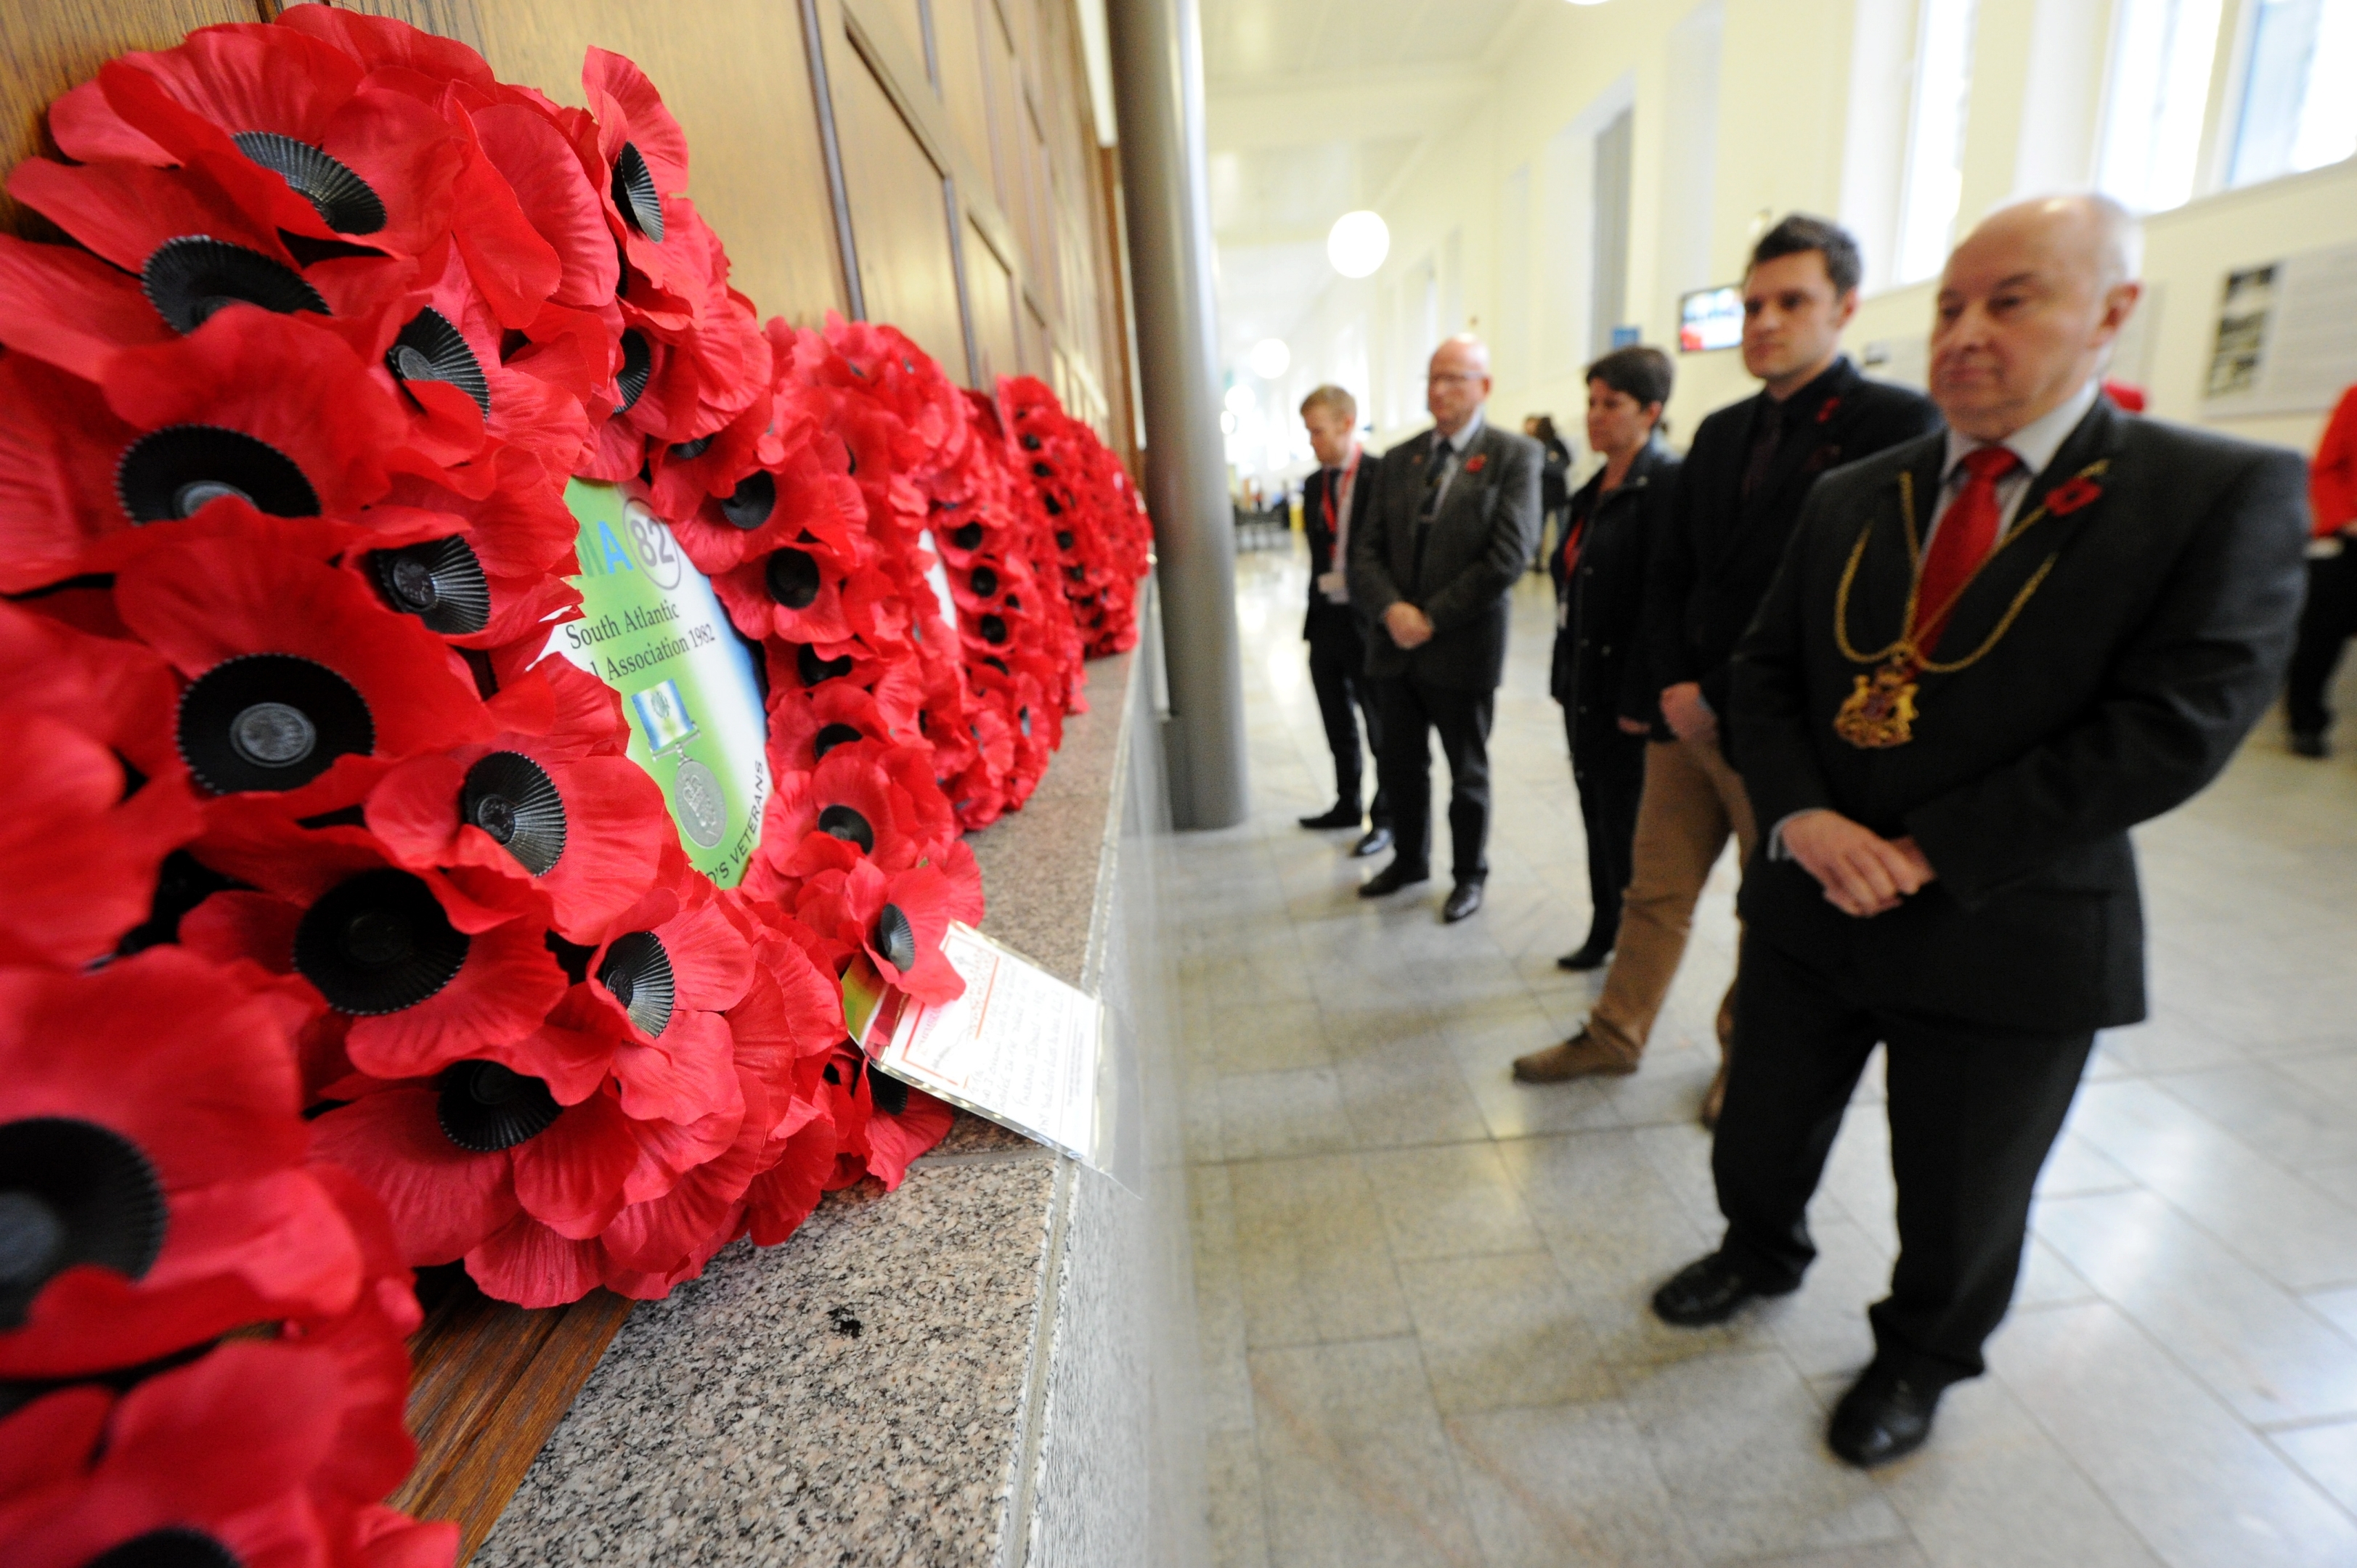 Aberdeen Lord Provost George Adam joined council staff and members of the public at Marischal College customer service area to remember the nation's war dead, and observe the national two-minute silence. Pictures by KENNY ELRICK 